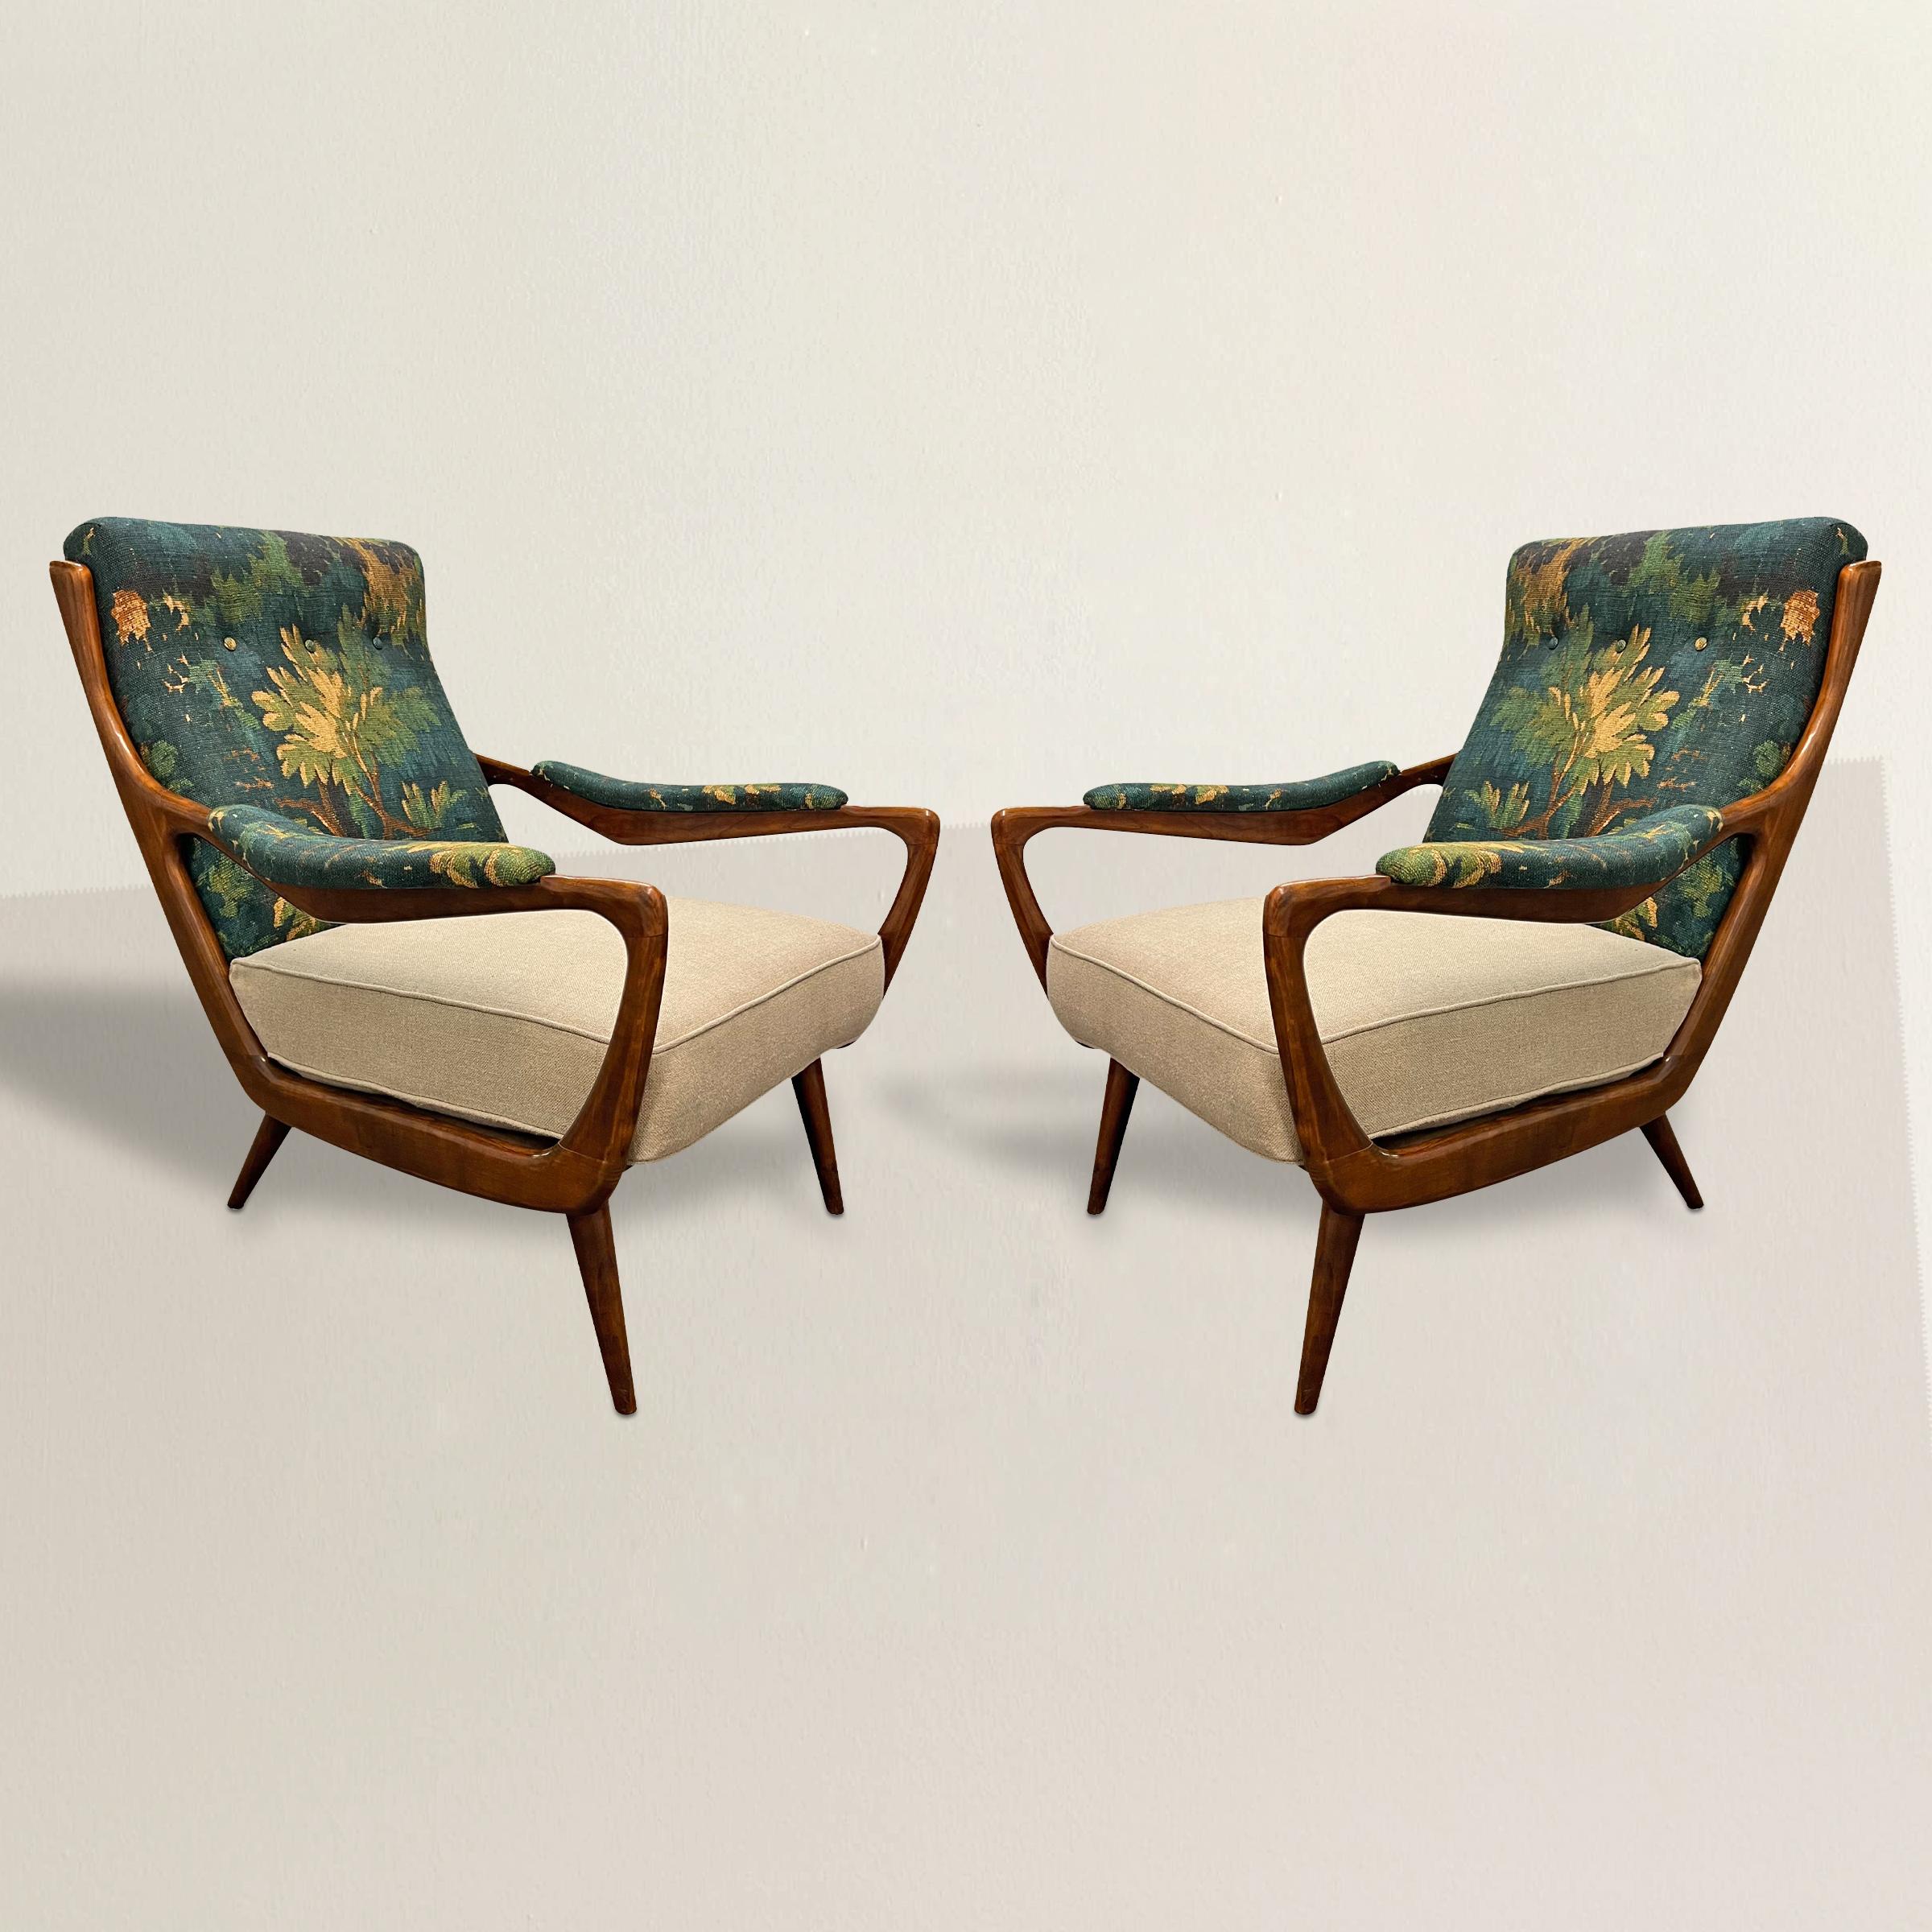 Elevate your interior with this pair of 1950s Danish Modern lounge chairs, a harmonious blend of mid-century elegance and contemporary style. The chic wood frames, emblematic of Danish Modern design, exemplify the movement's emphasis on natural